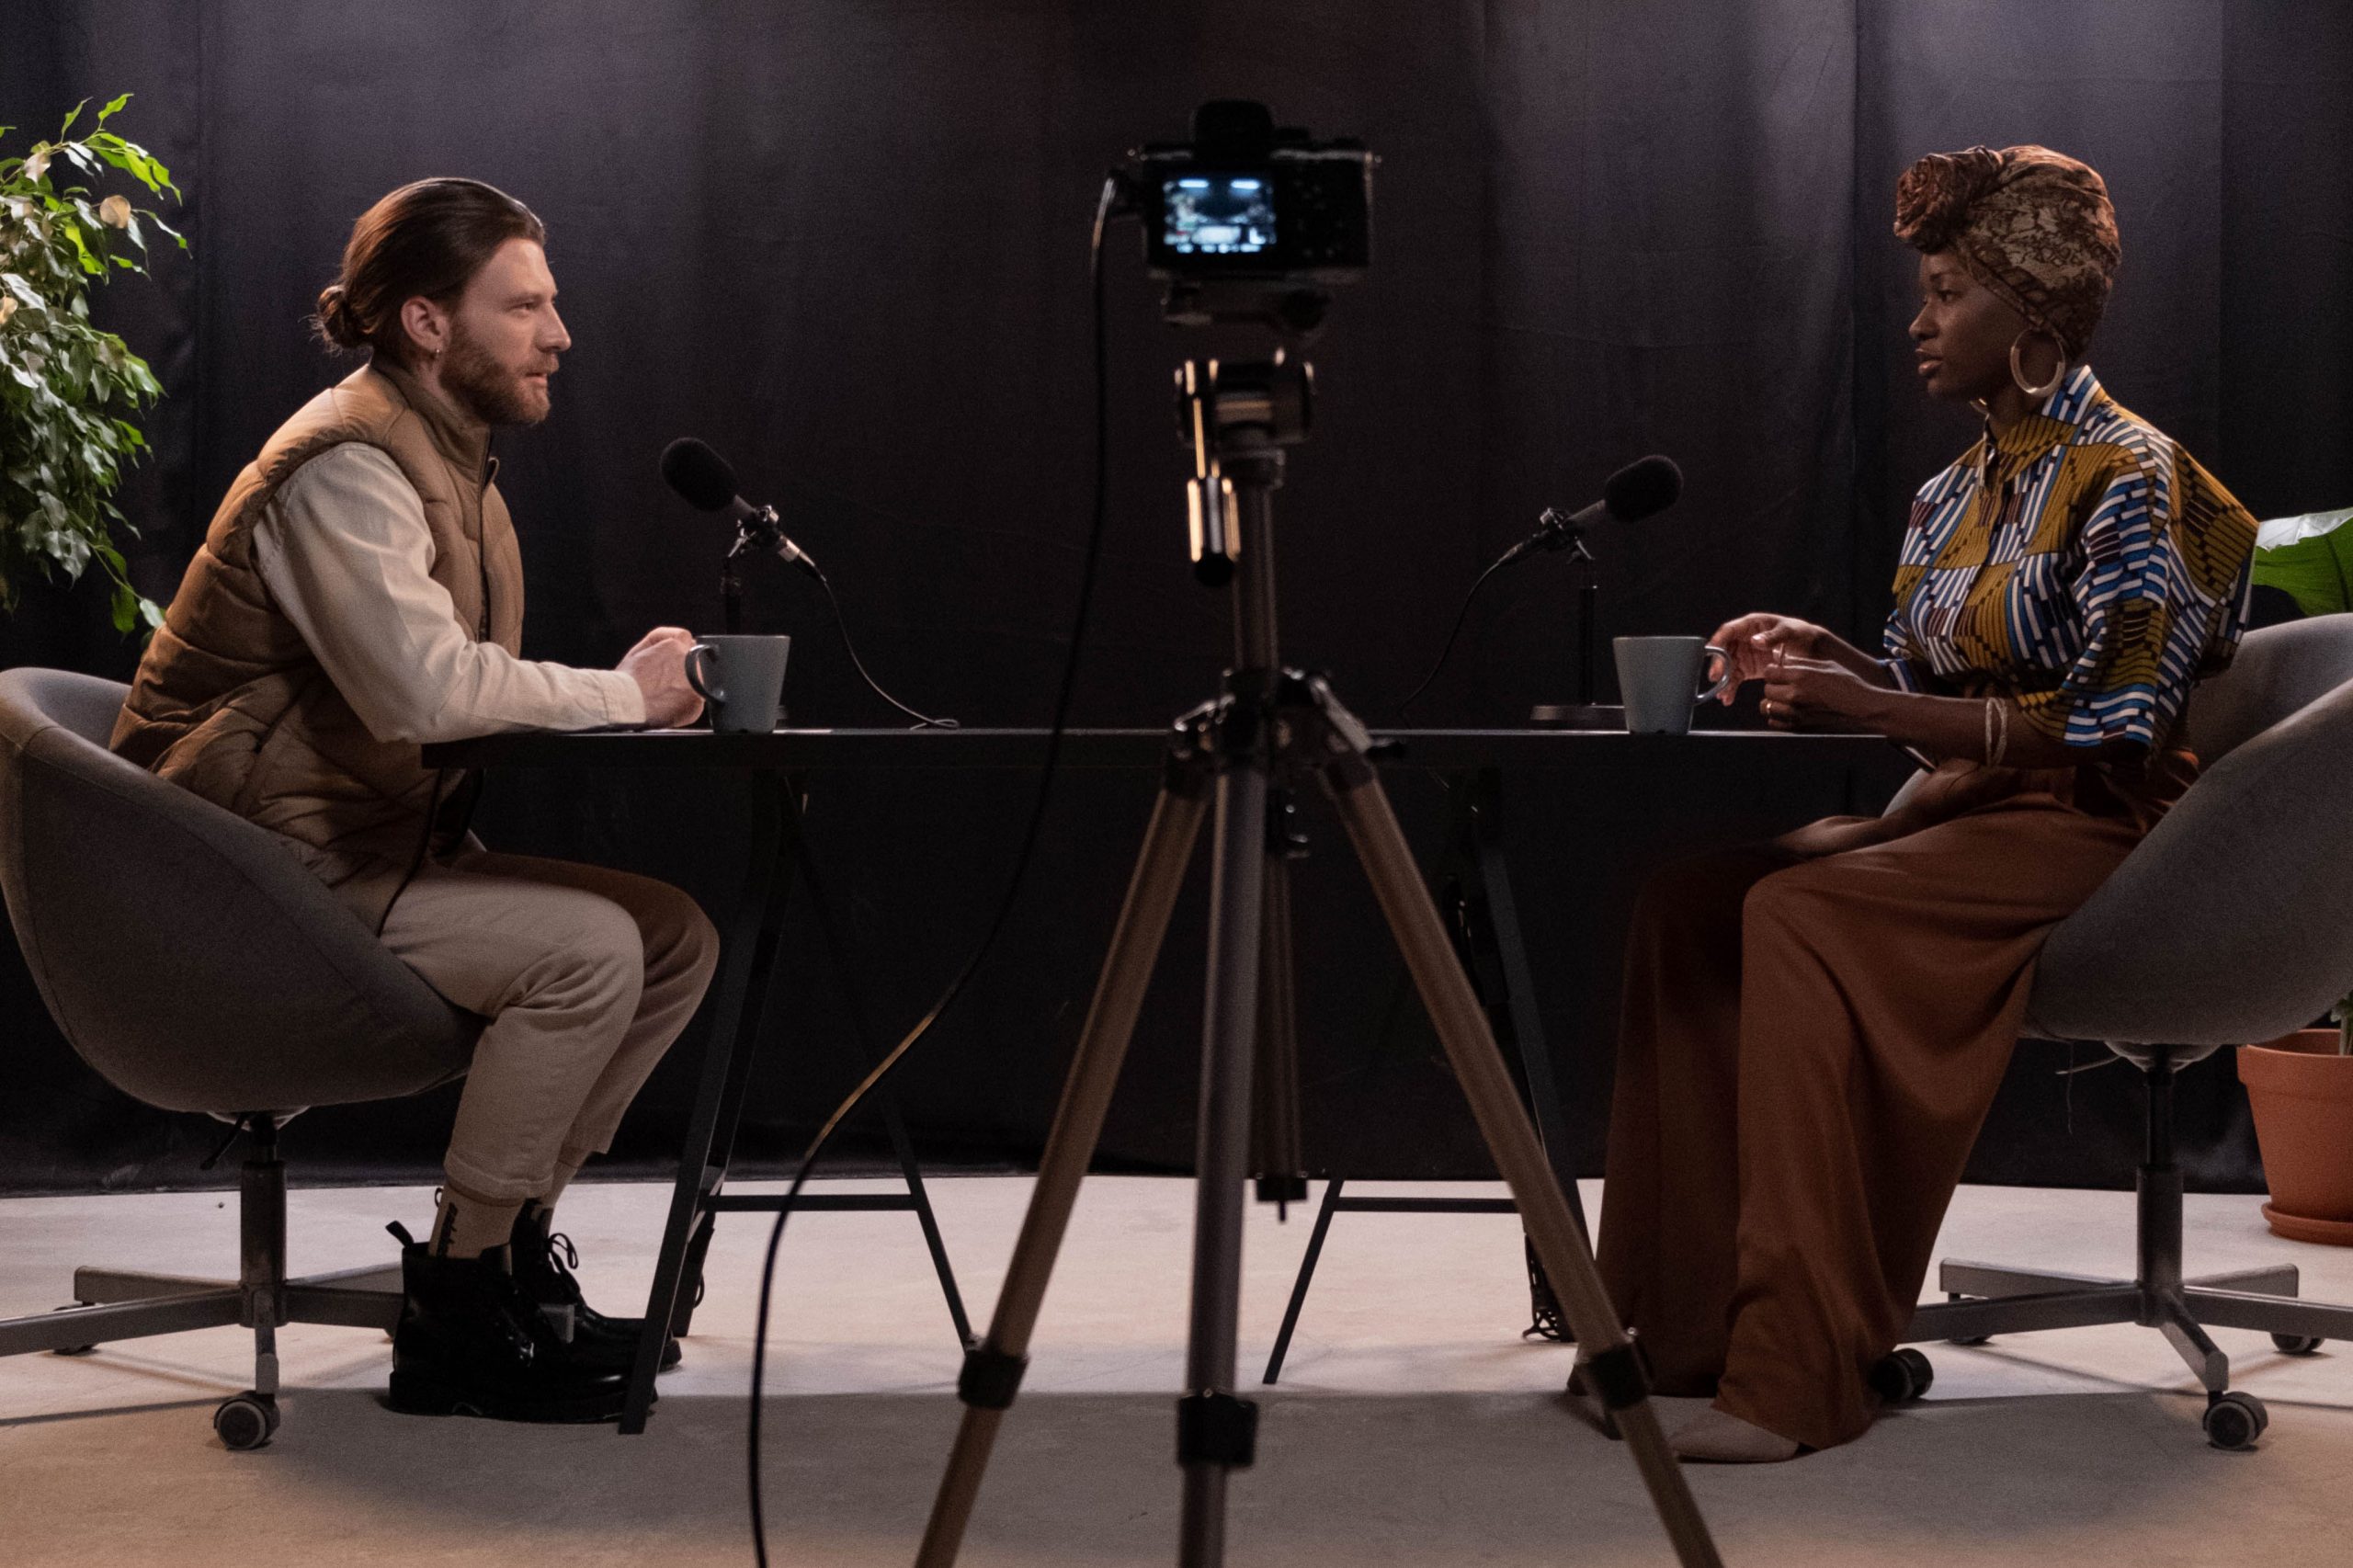 Image shows a man and a woman recording a video podcast. You can see them both sat at a desk with a microphone each and a camera set up in between them.